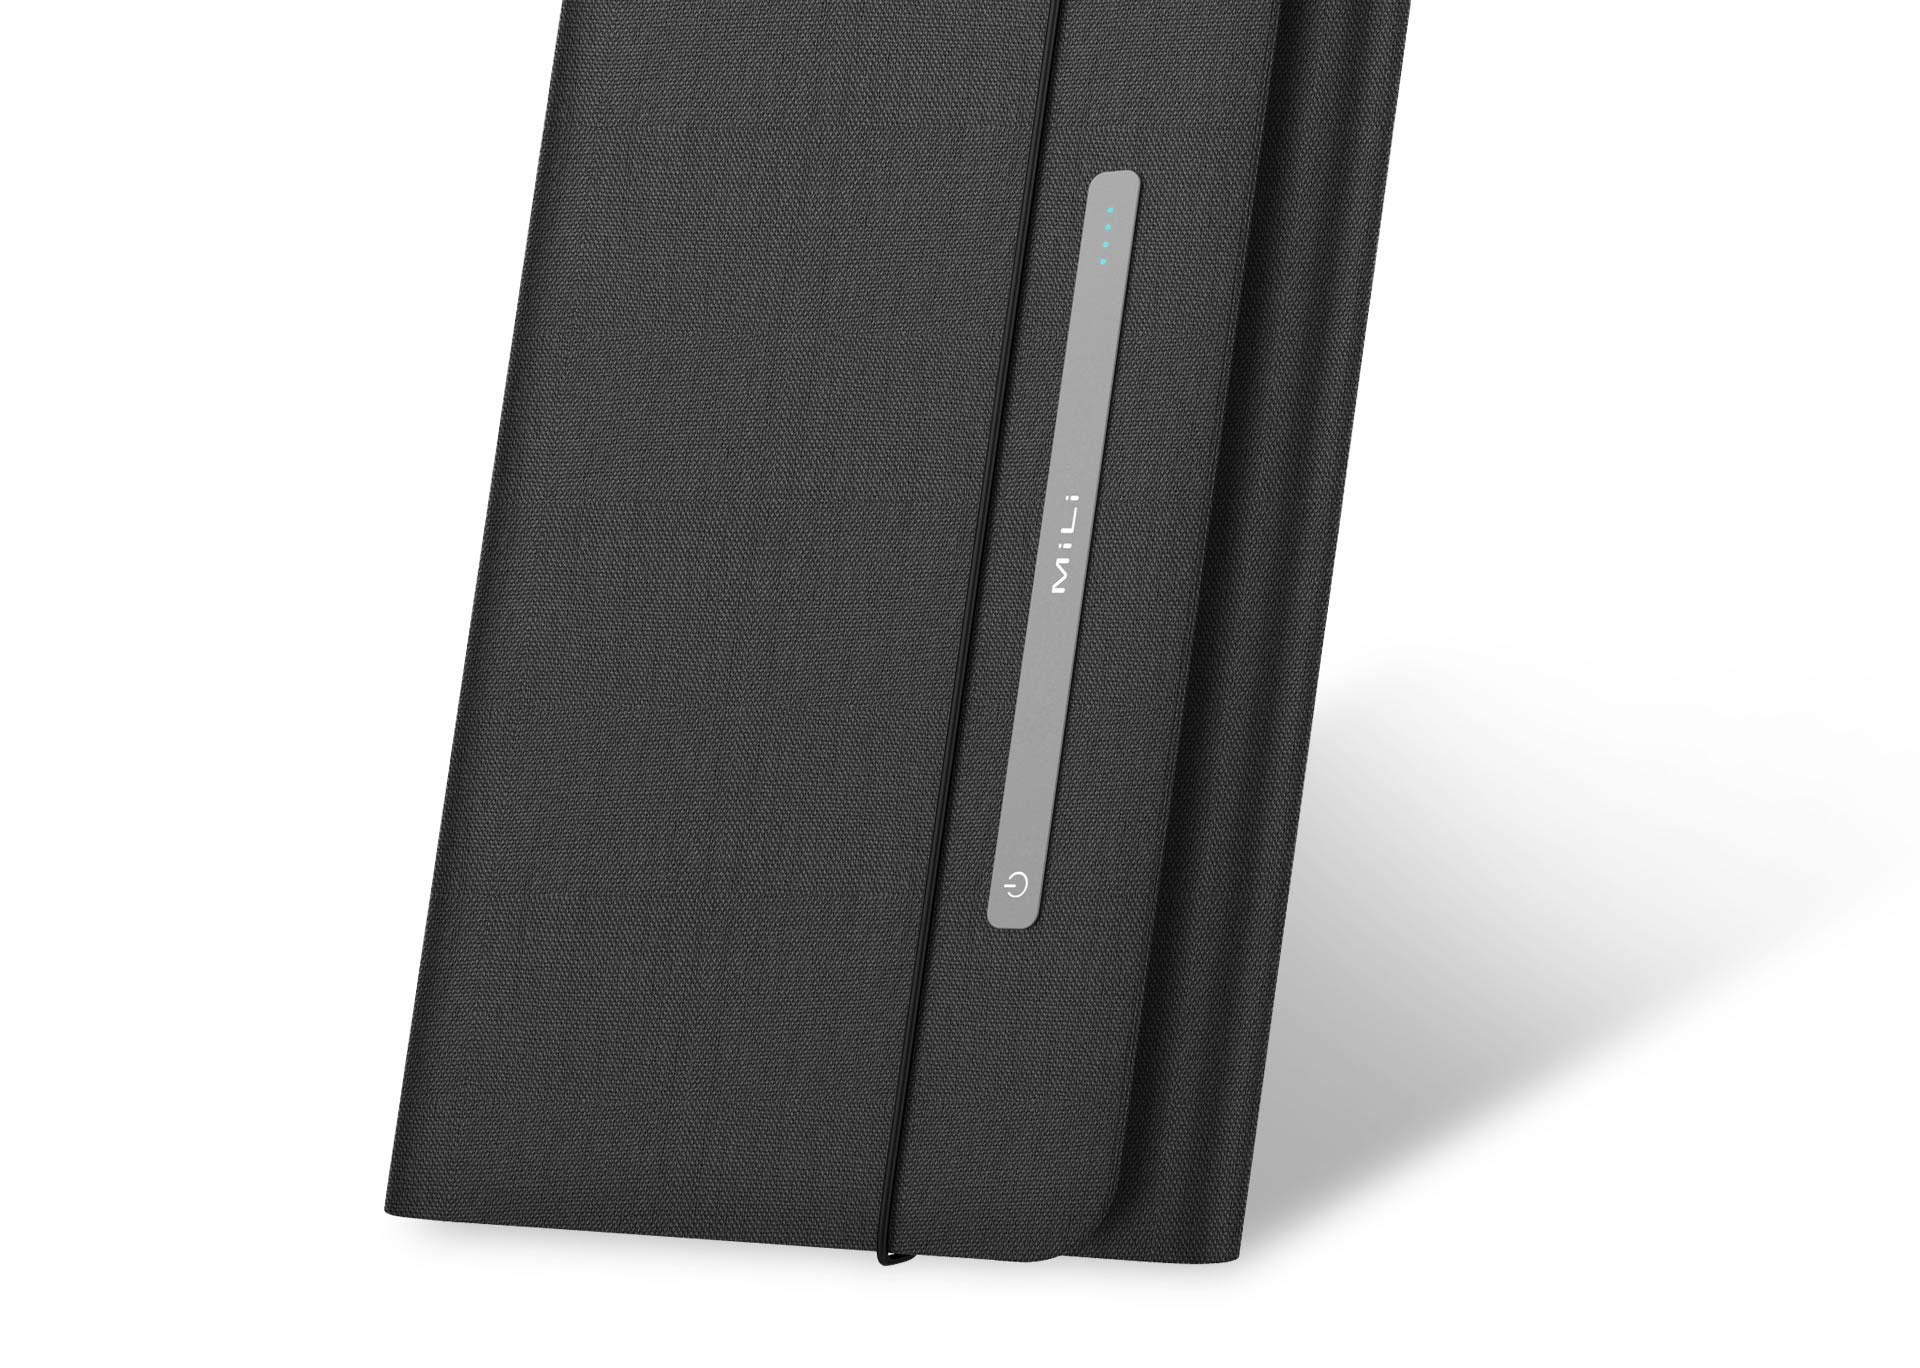 Notepad Gadget Chargers : mili power notebook